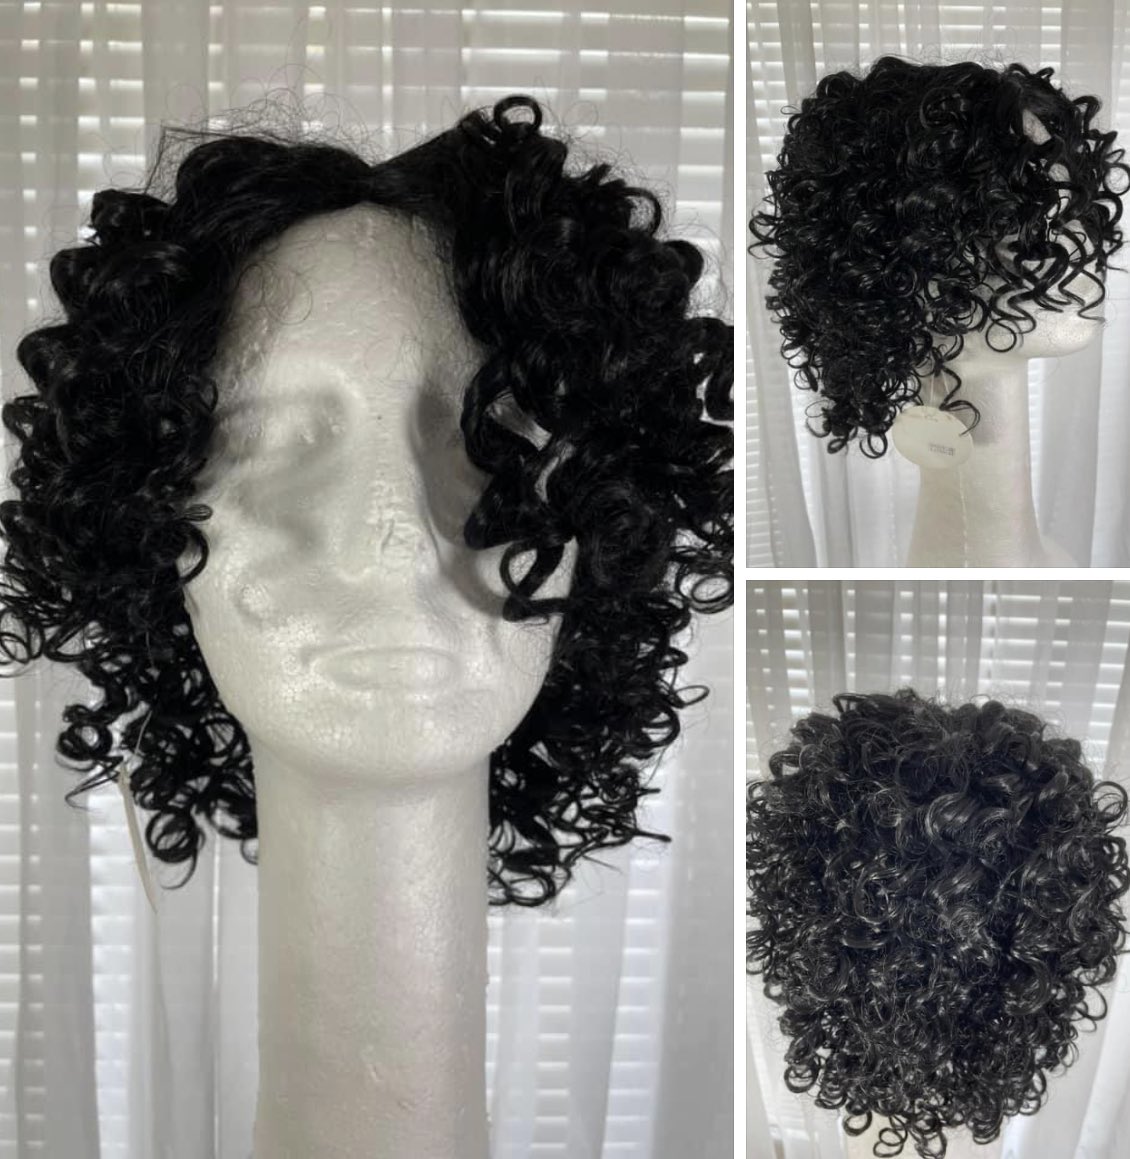 Women’s Wig 11” Black Natural Wavy Spiral Curls Center Part Short Heat Safe NWT
Buy link:  rb.gy/x0lxe
#wigsforsale #wavycurly #curlybob #naturalwig #syntheticwigs #wigsforblackwomen #wigsforhairloss